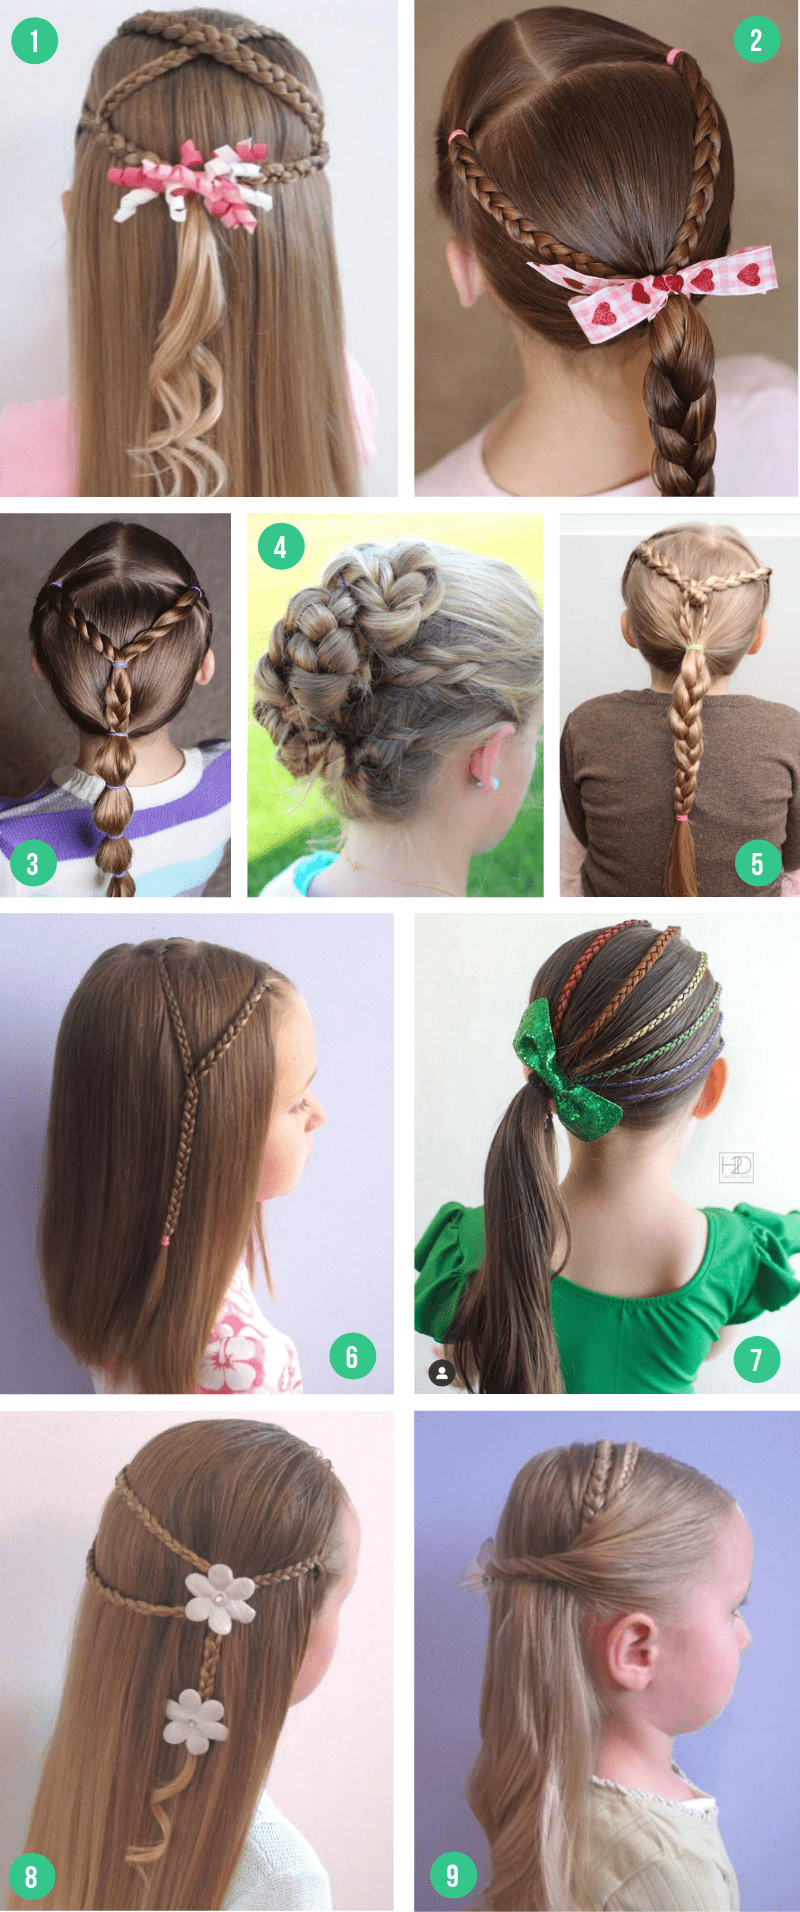 Easy Braids For Girls From Toddlers To Tweens And Teens